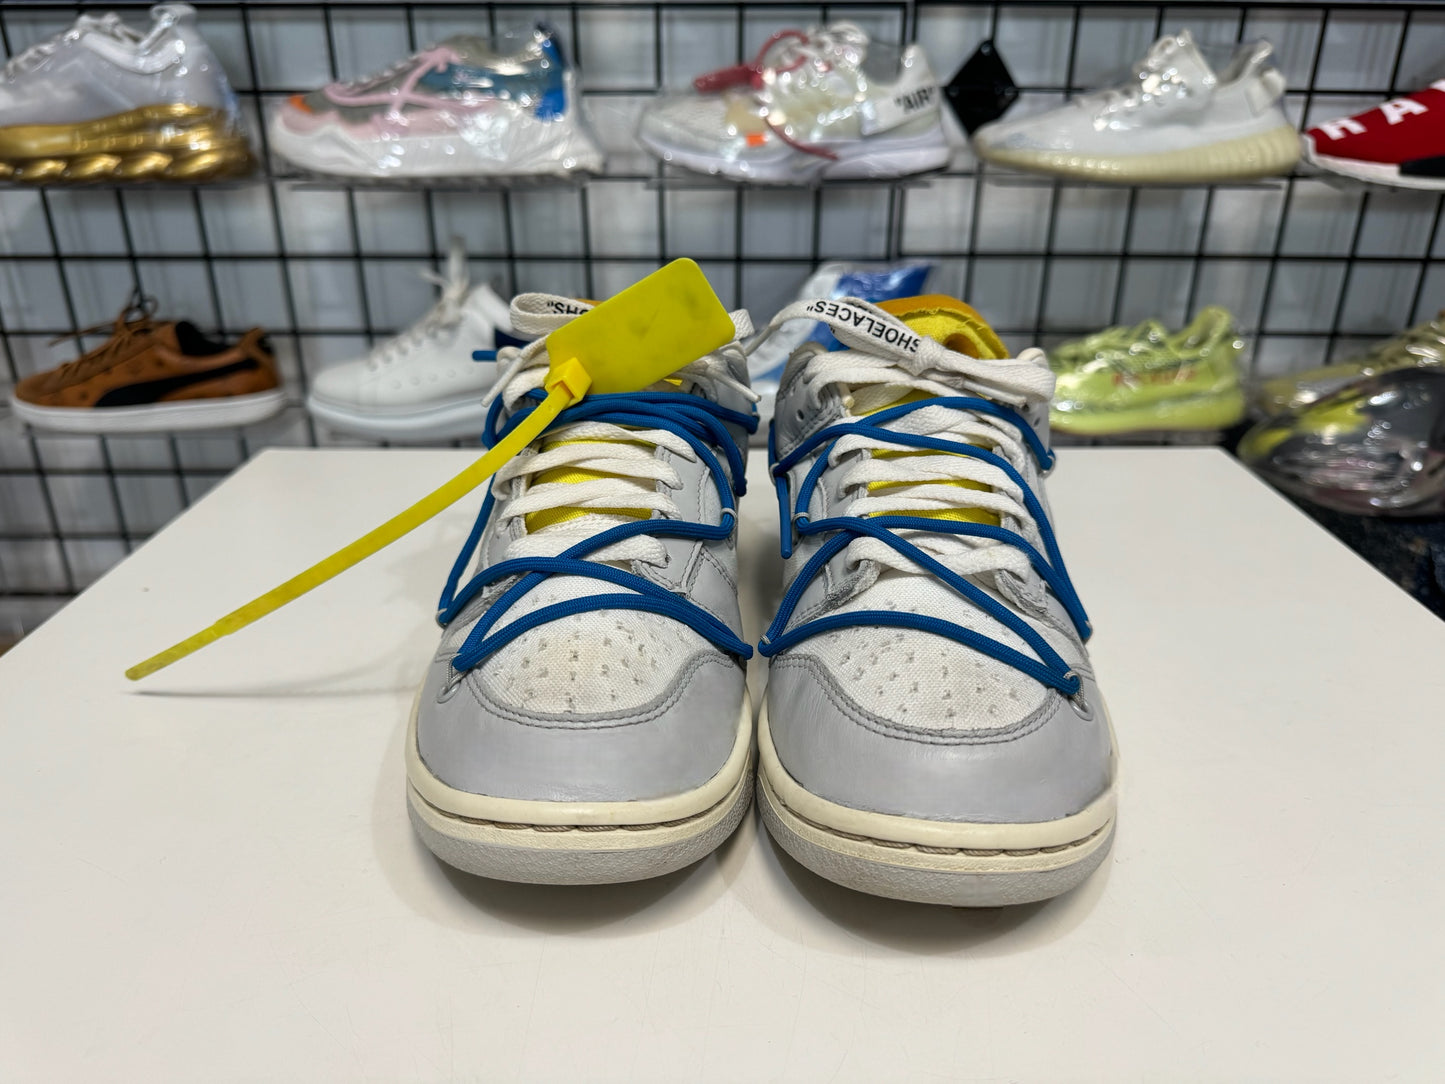 Nike Dunk Low Off-White Lot 10 size 8